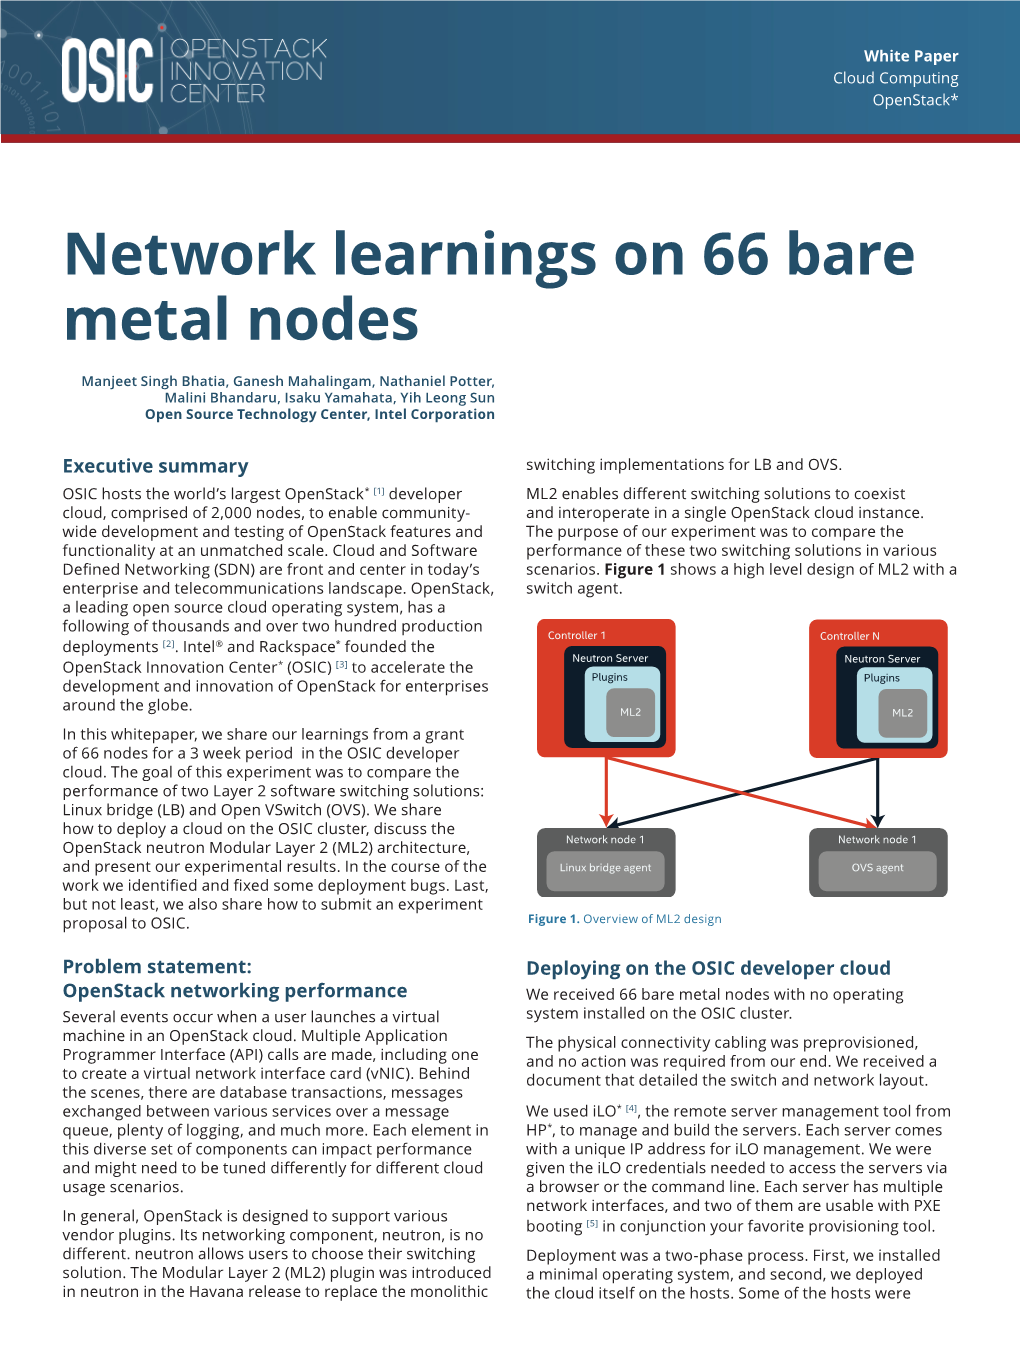 Network Learnings on 66 Bare Metal Nodes